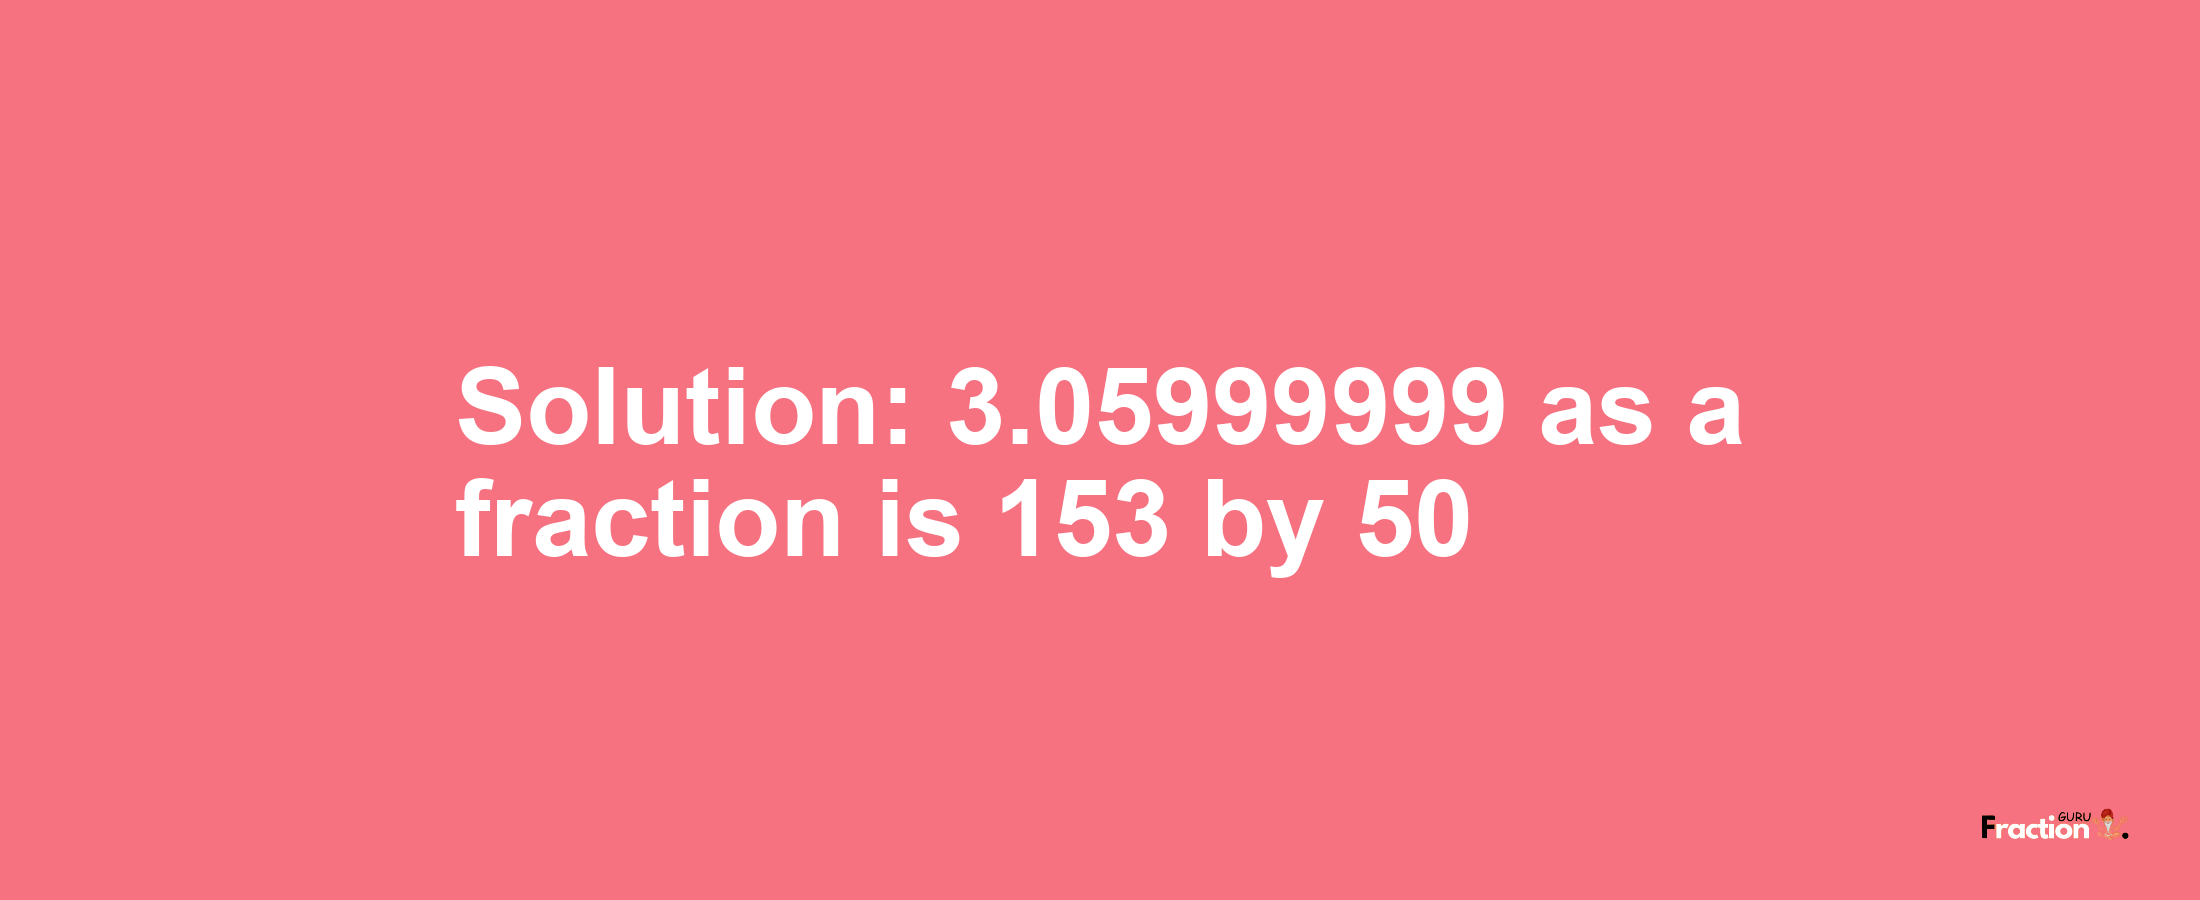 Solution:3.05999999 as a fraction is 153/50